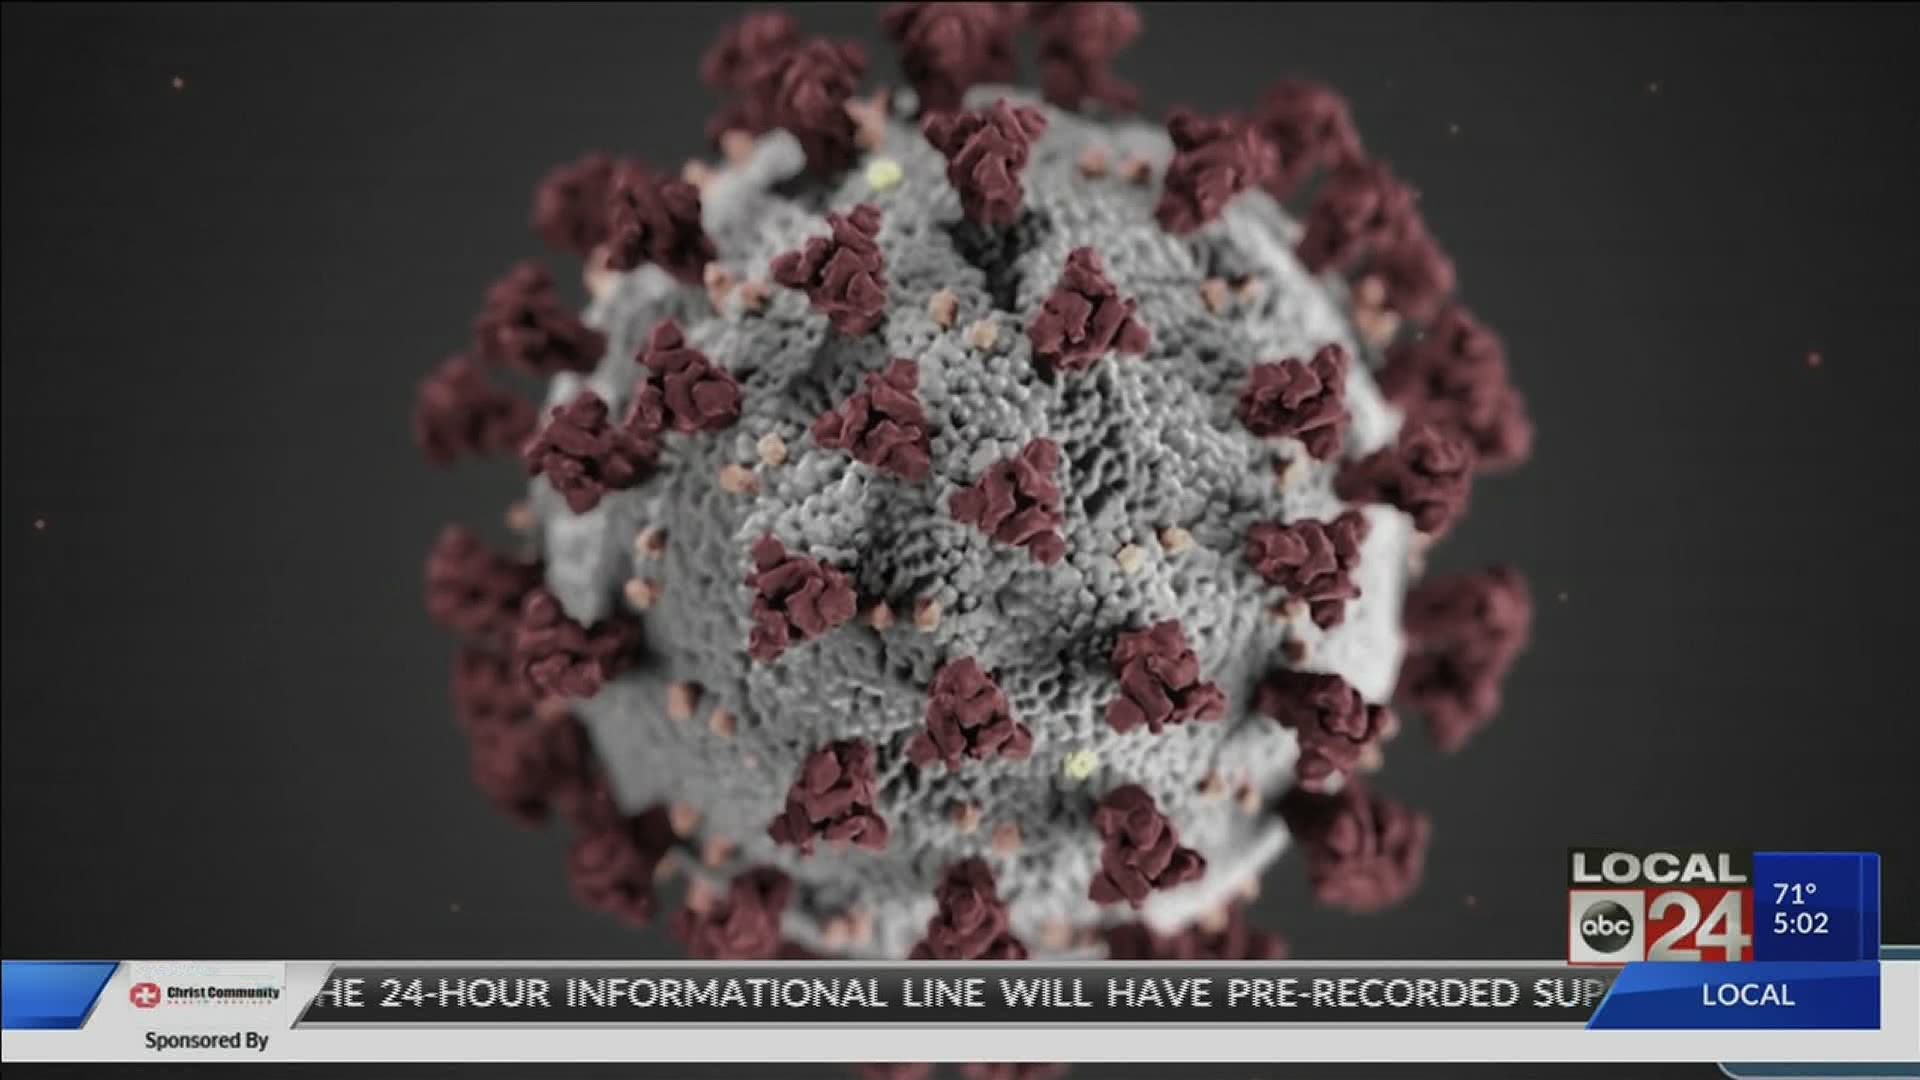 Seven such facilities across Shelby County report clusters of coronavirus cases